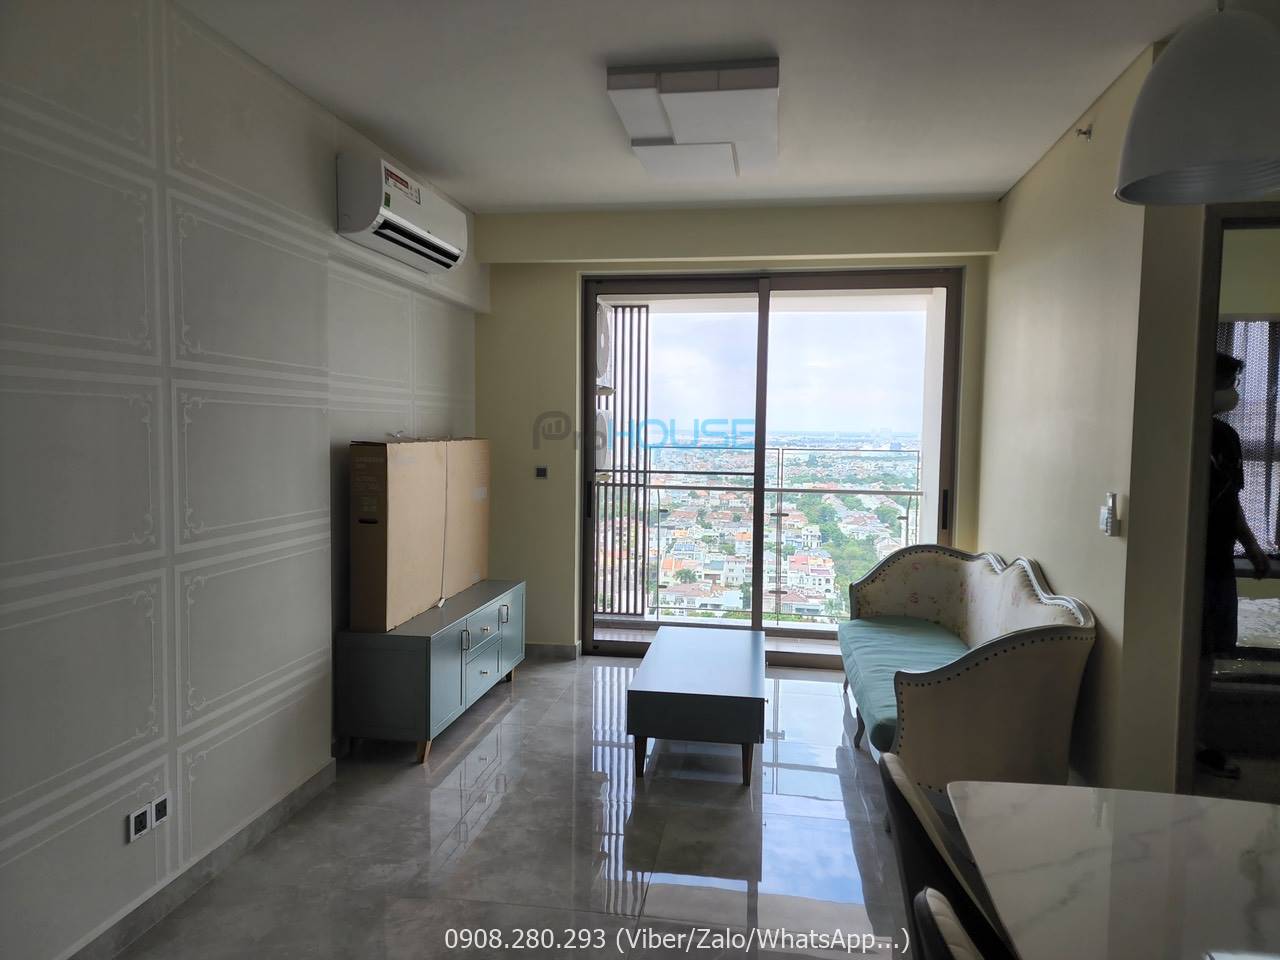 2 bedroom apartment in Midtown M8 for rent with nice furniture and high floor